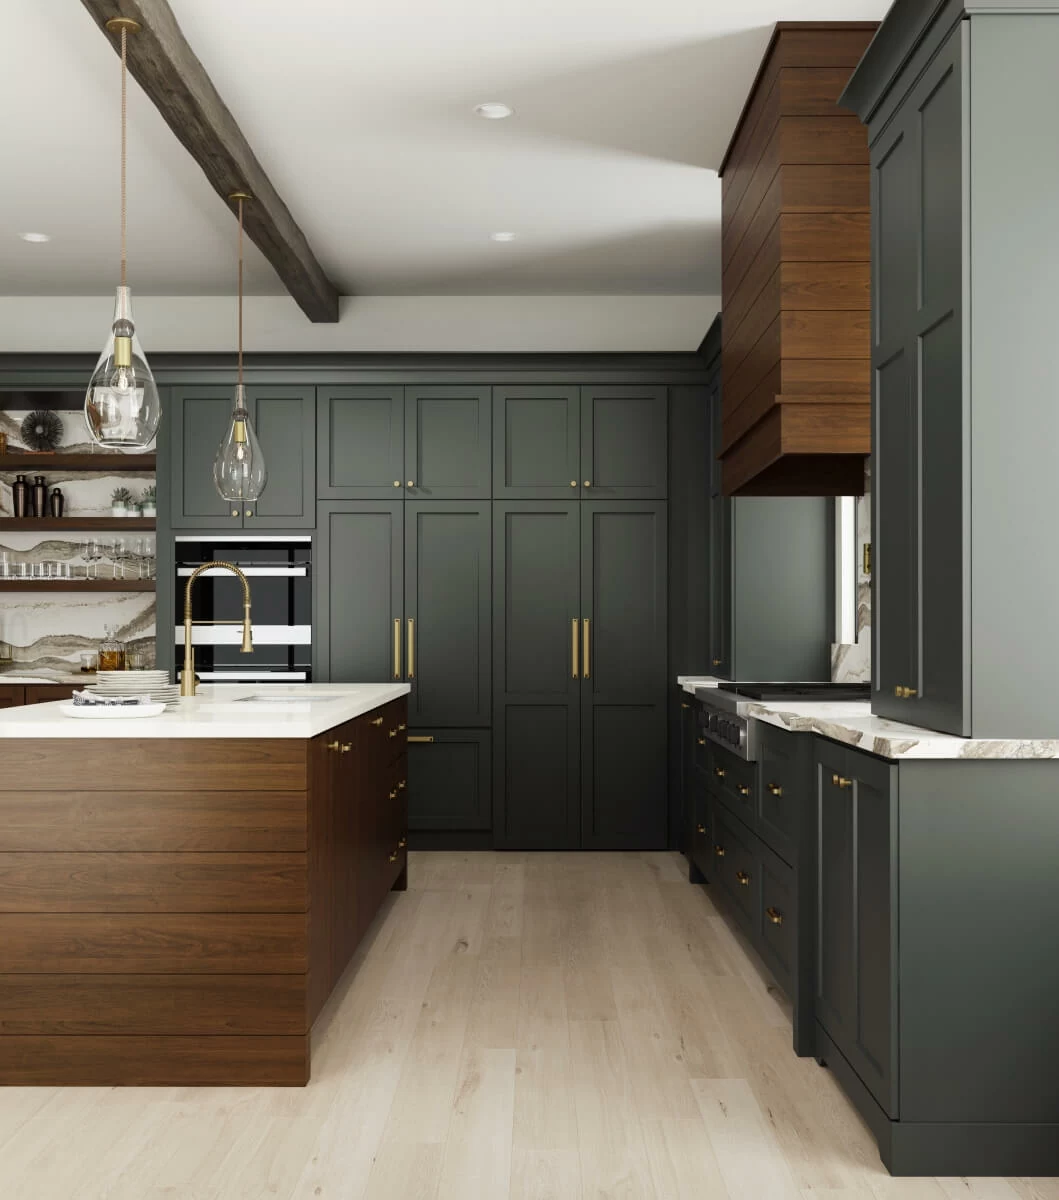 Dark gray and rich stained wood kitchen with modern farmhouse style, shiplap wood hood, shiplap kitchen island end cap and brassy hardware and fixtures. Features floor to ceiling dark gray painted cabinets. Cabinetry from Dura Supreme.